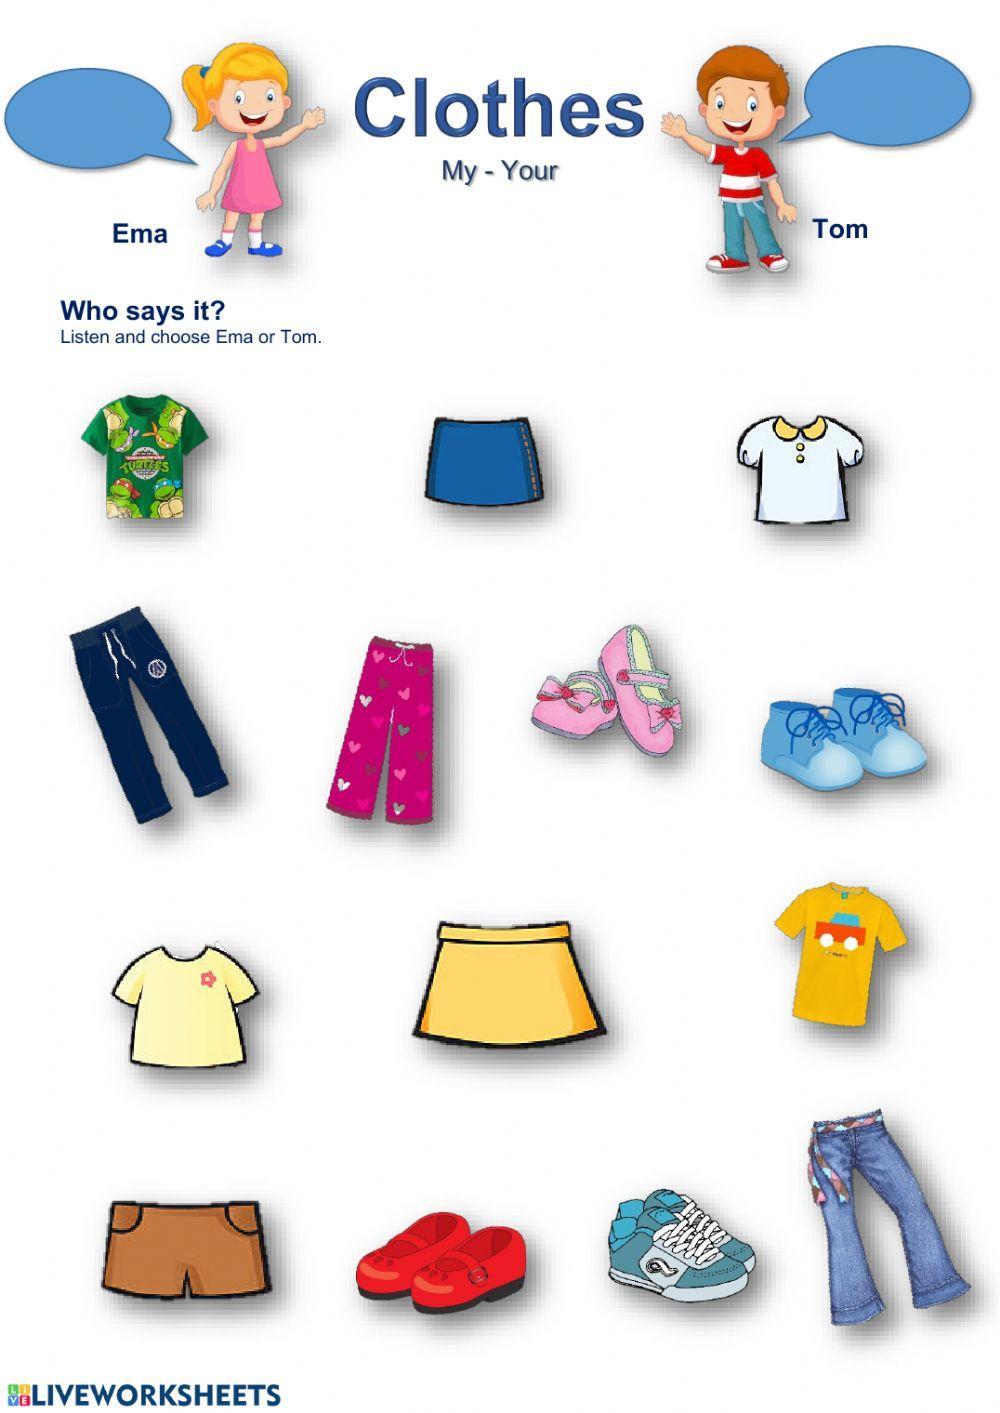 Clothes - my-your